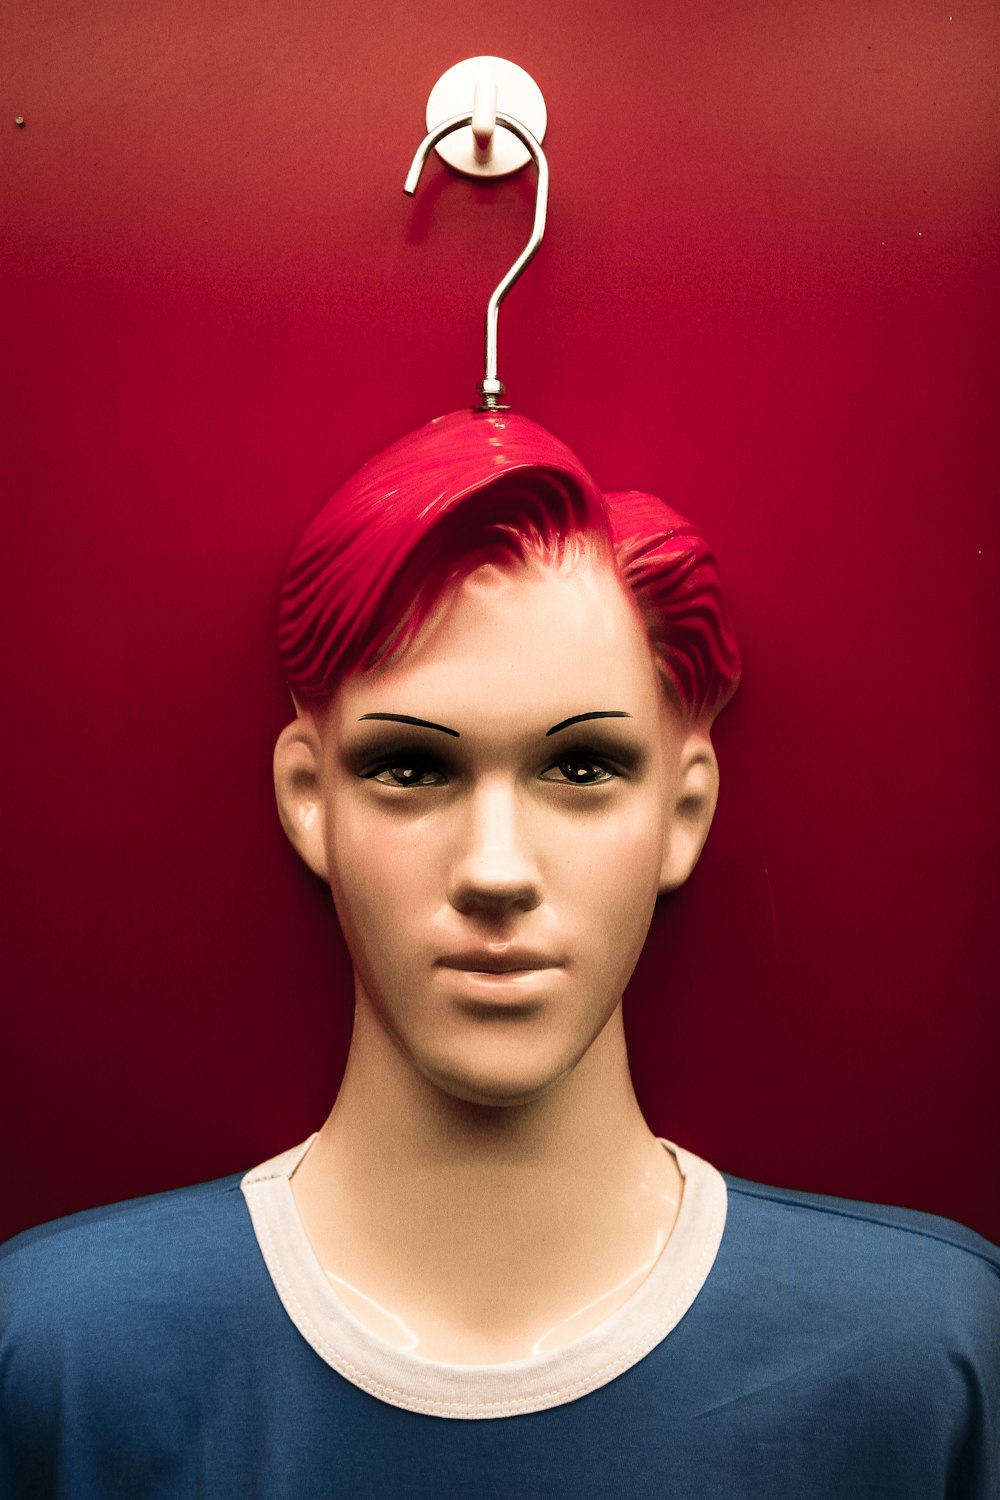 A redhaired mannequin.